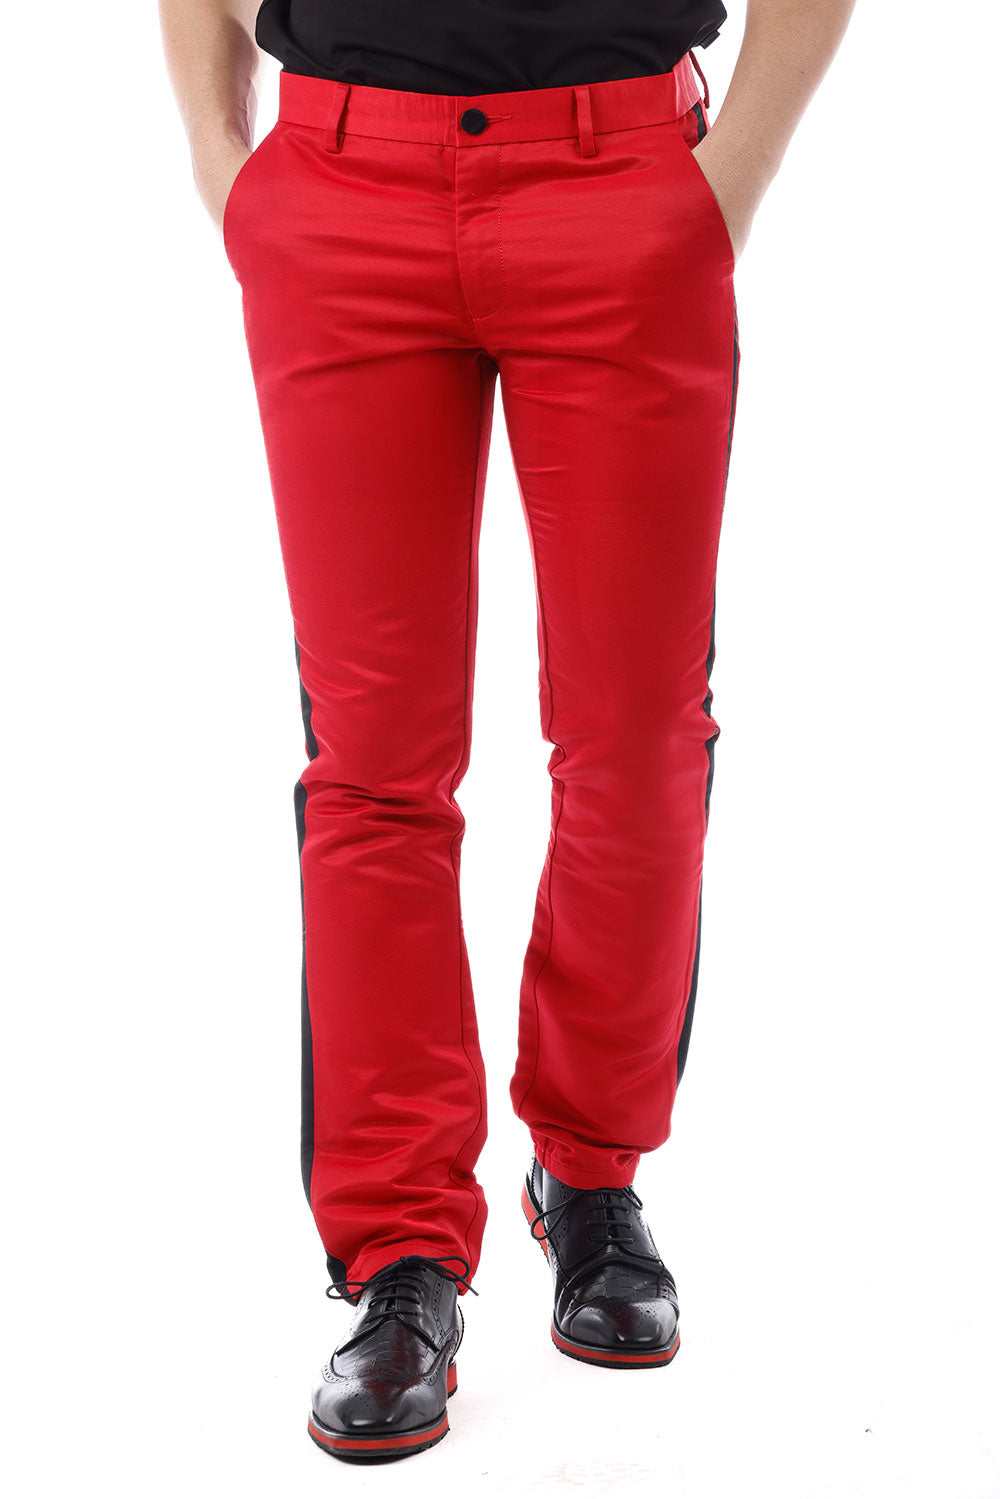 BARABAS men's shinny straight red pants with a side black line 1900 Red Black